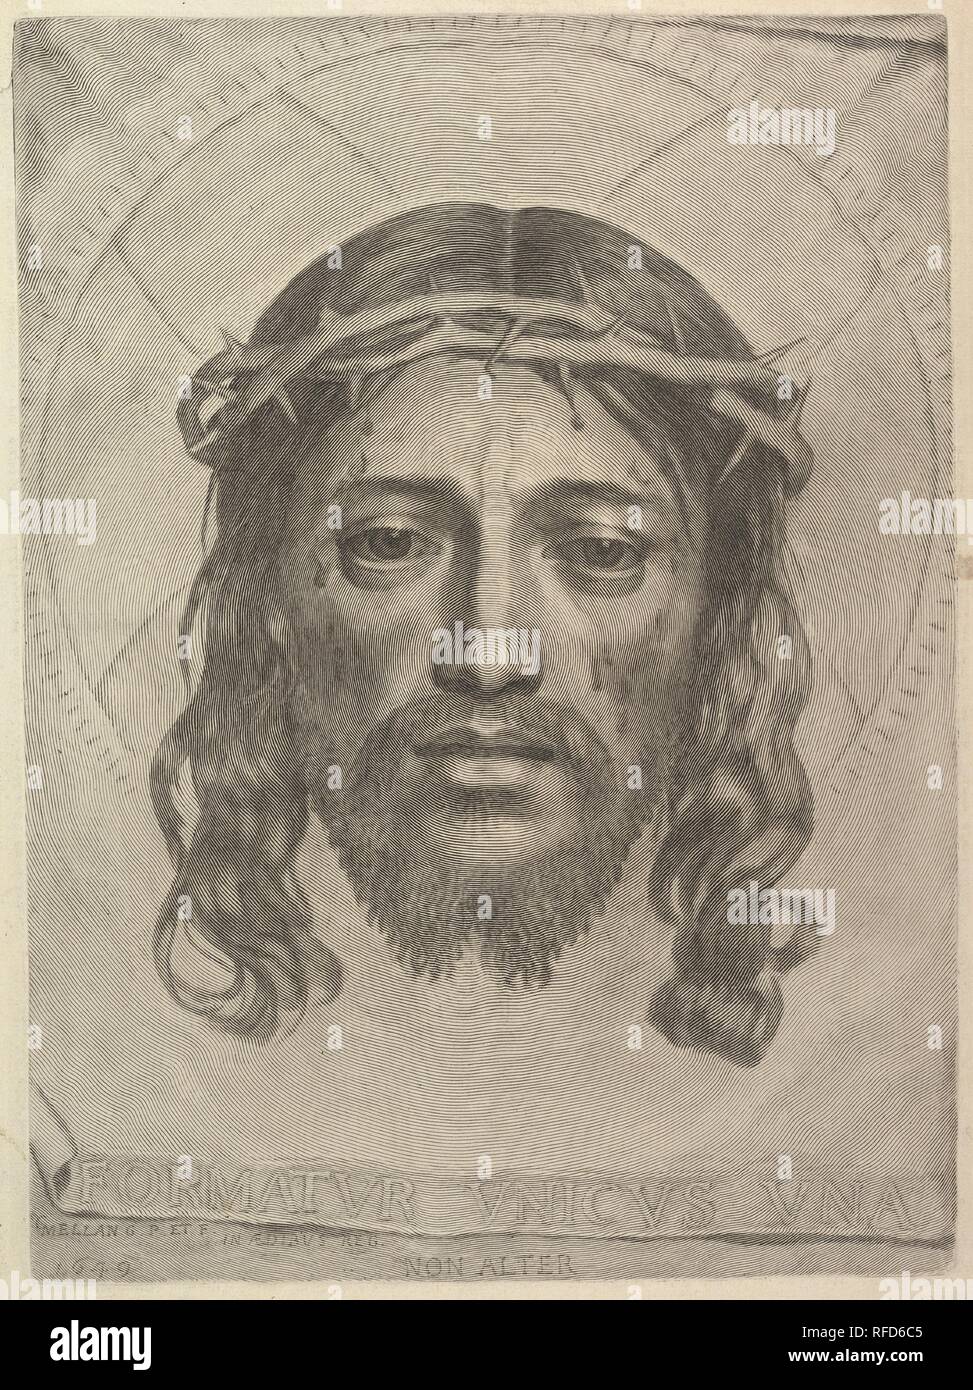 Face of Christ on St. Veronica's Cloth. Artist: Claude Mellan (French, Abbeville 1598-1688 Paris). Dimensions: plate: 16 15/16 x 12 3/8 in. (43 x 31.5 cm)  sheet: 18 1/8 x 13 11/16 in. (46 x 34.8 cm). Date: 1649. Museum: Metropolitan Museum of Art, New York, USA. Author: CLAUDE MELLAN. MELLAN, CLAUDE. After Claude Mellan. Dudesert or Du Desert. Stock Photo